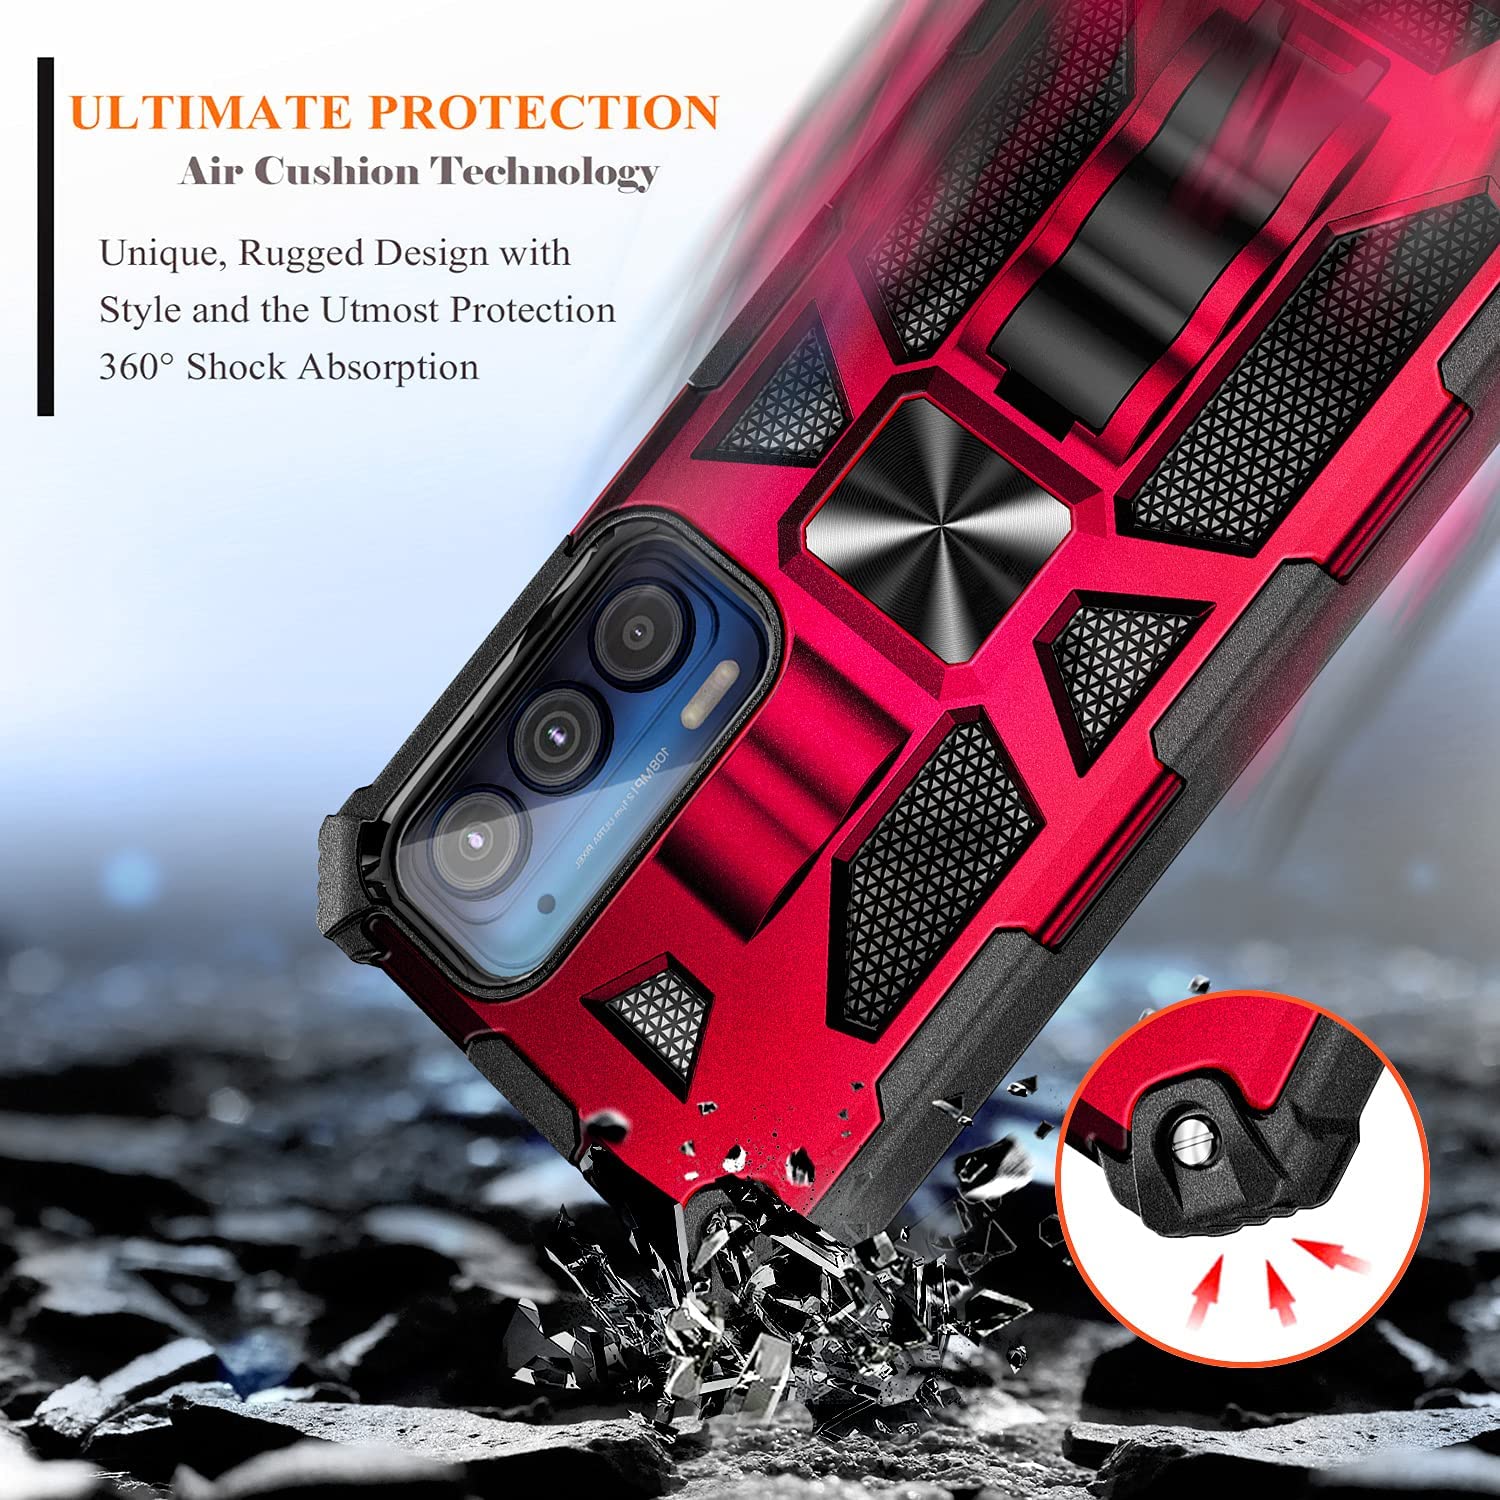 Nagebee Case for Motorola Moto Edge 5G UW, Moto Edge 2021 with Tempered Glass Screen Protector (Full Coverage), Full-Body Protective Shockproof [Military-Grade], Built in Kickstand Case (Red) - image 4 of 5